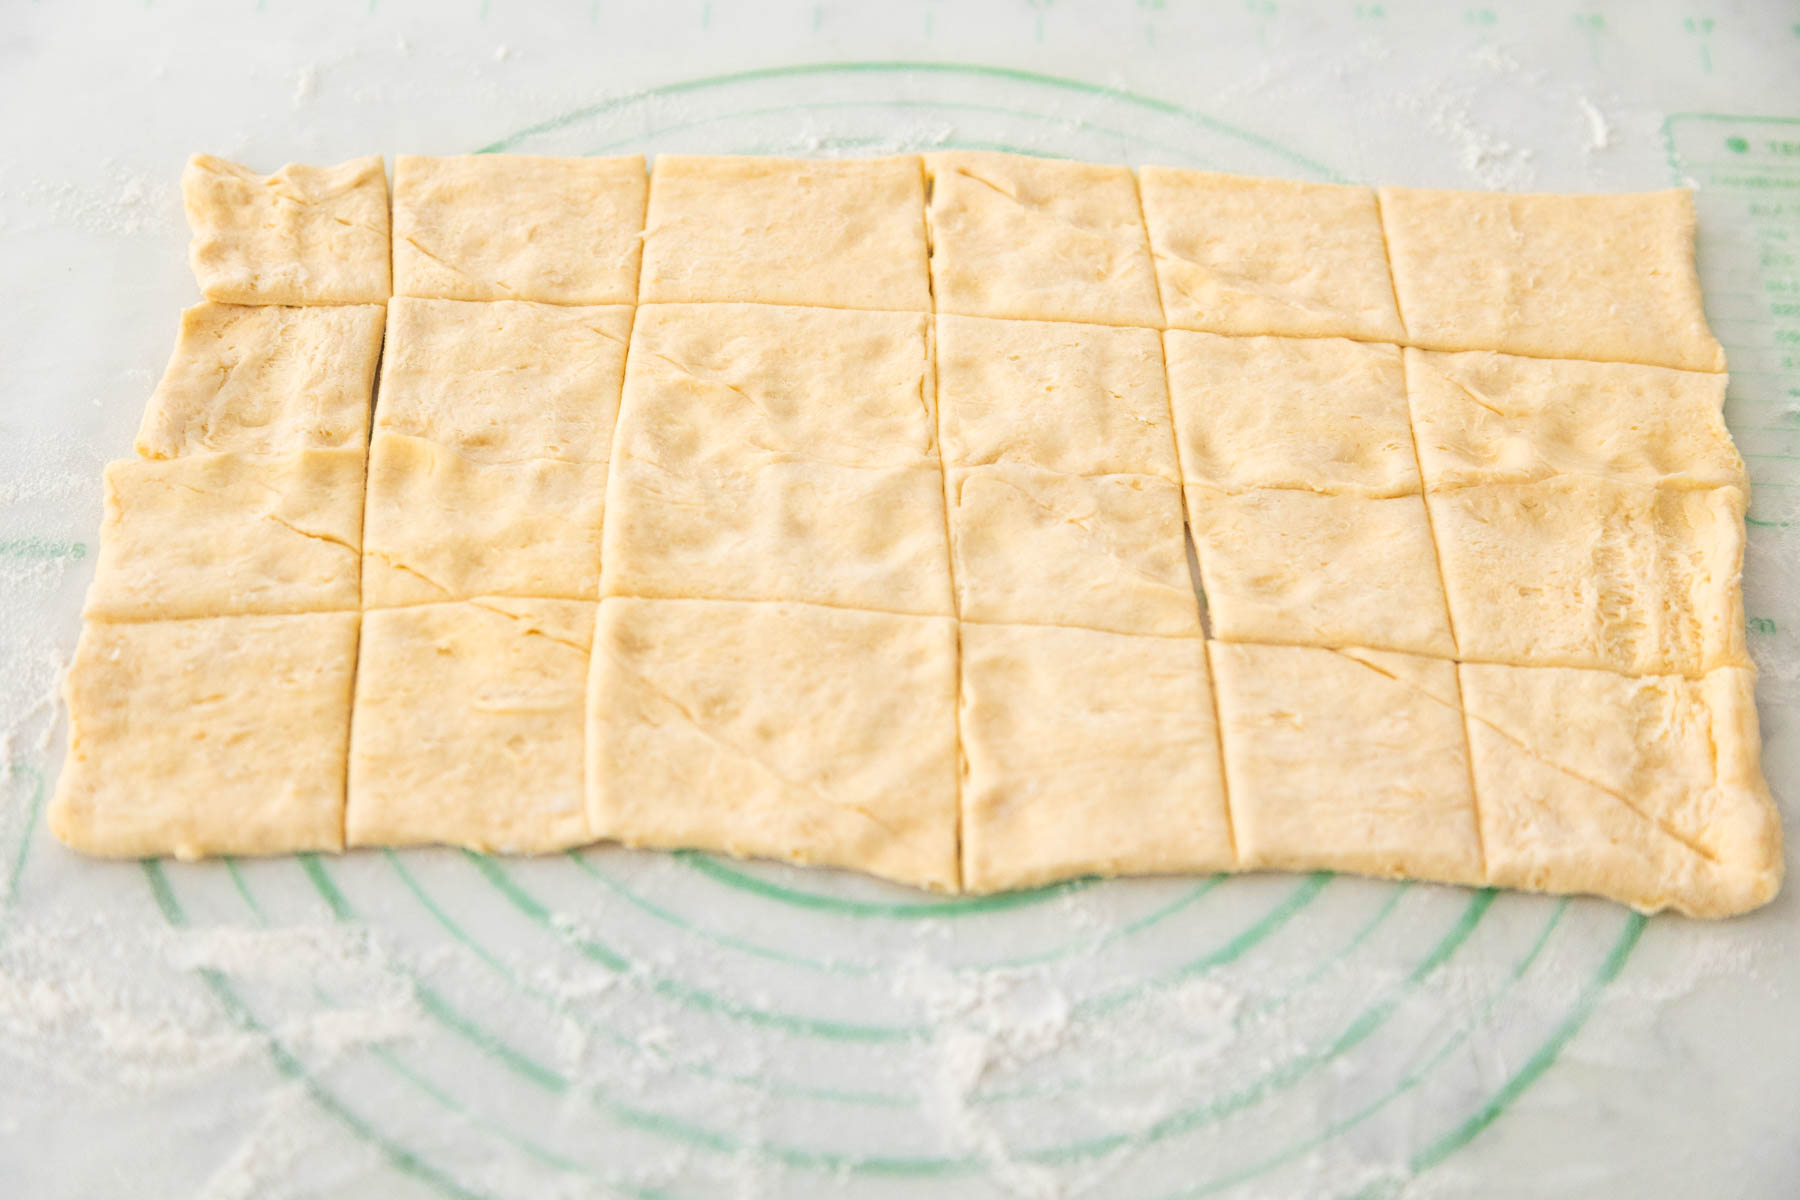 The dough has been rolled out and cut into 24 squares with a pizza cutter.